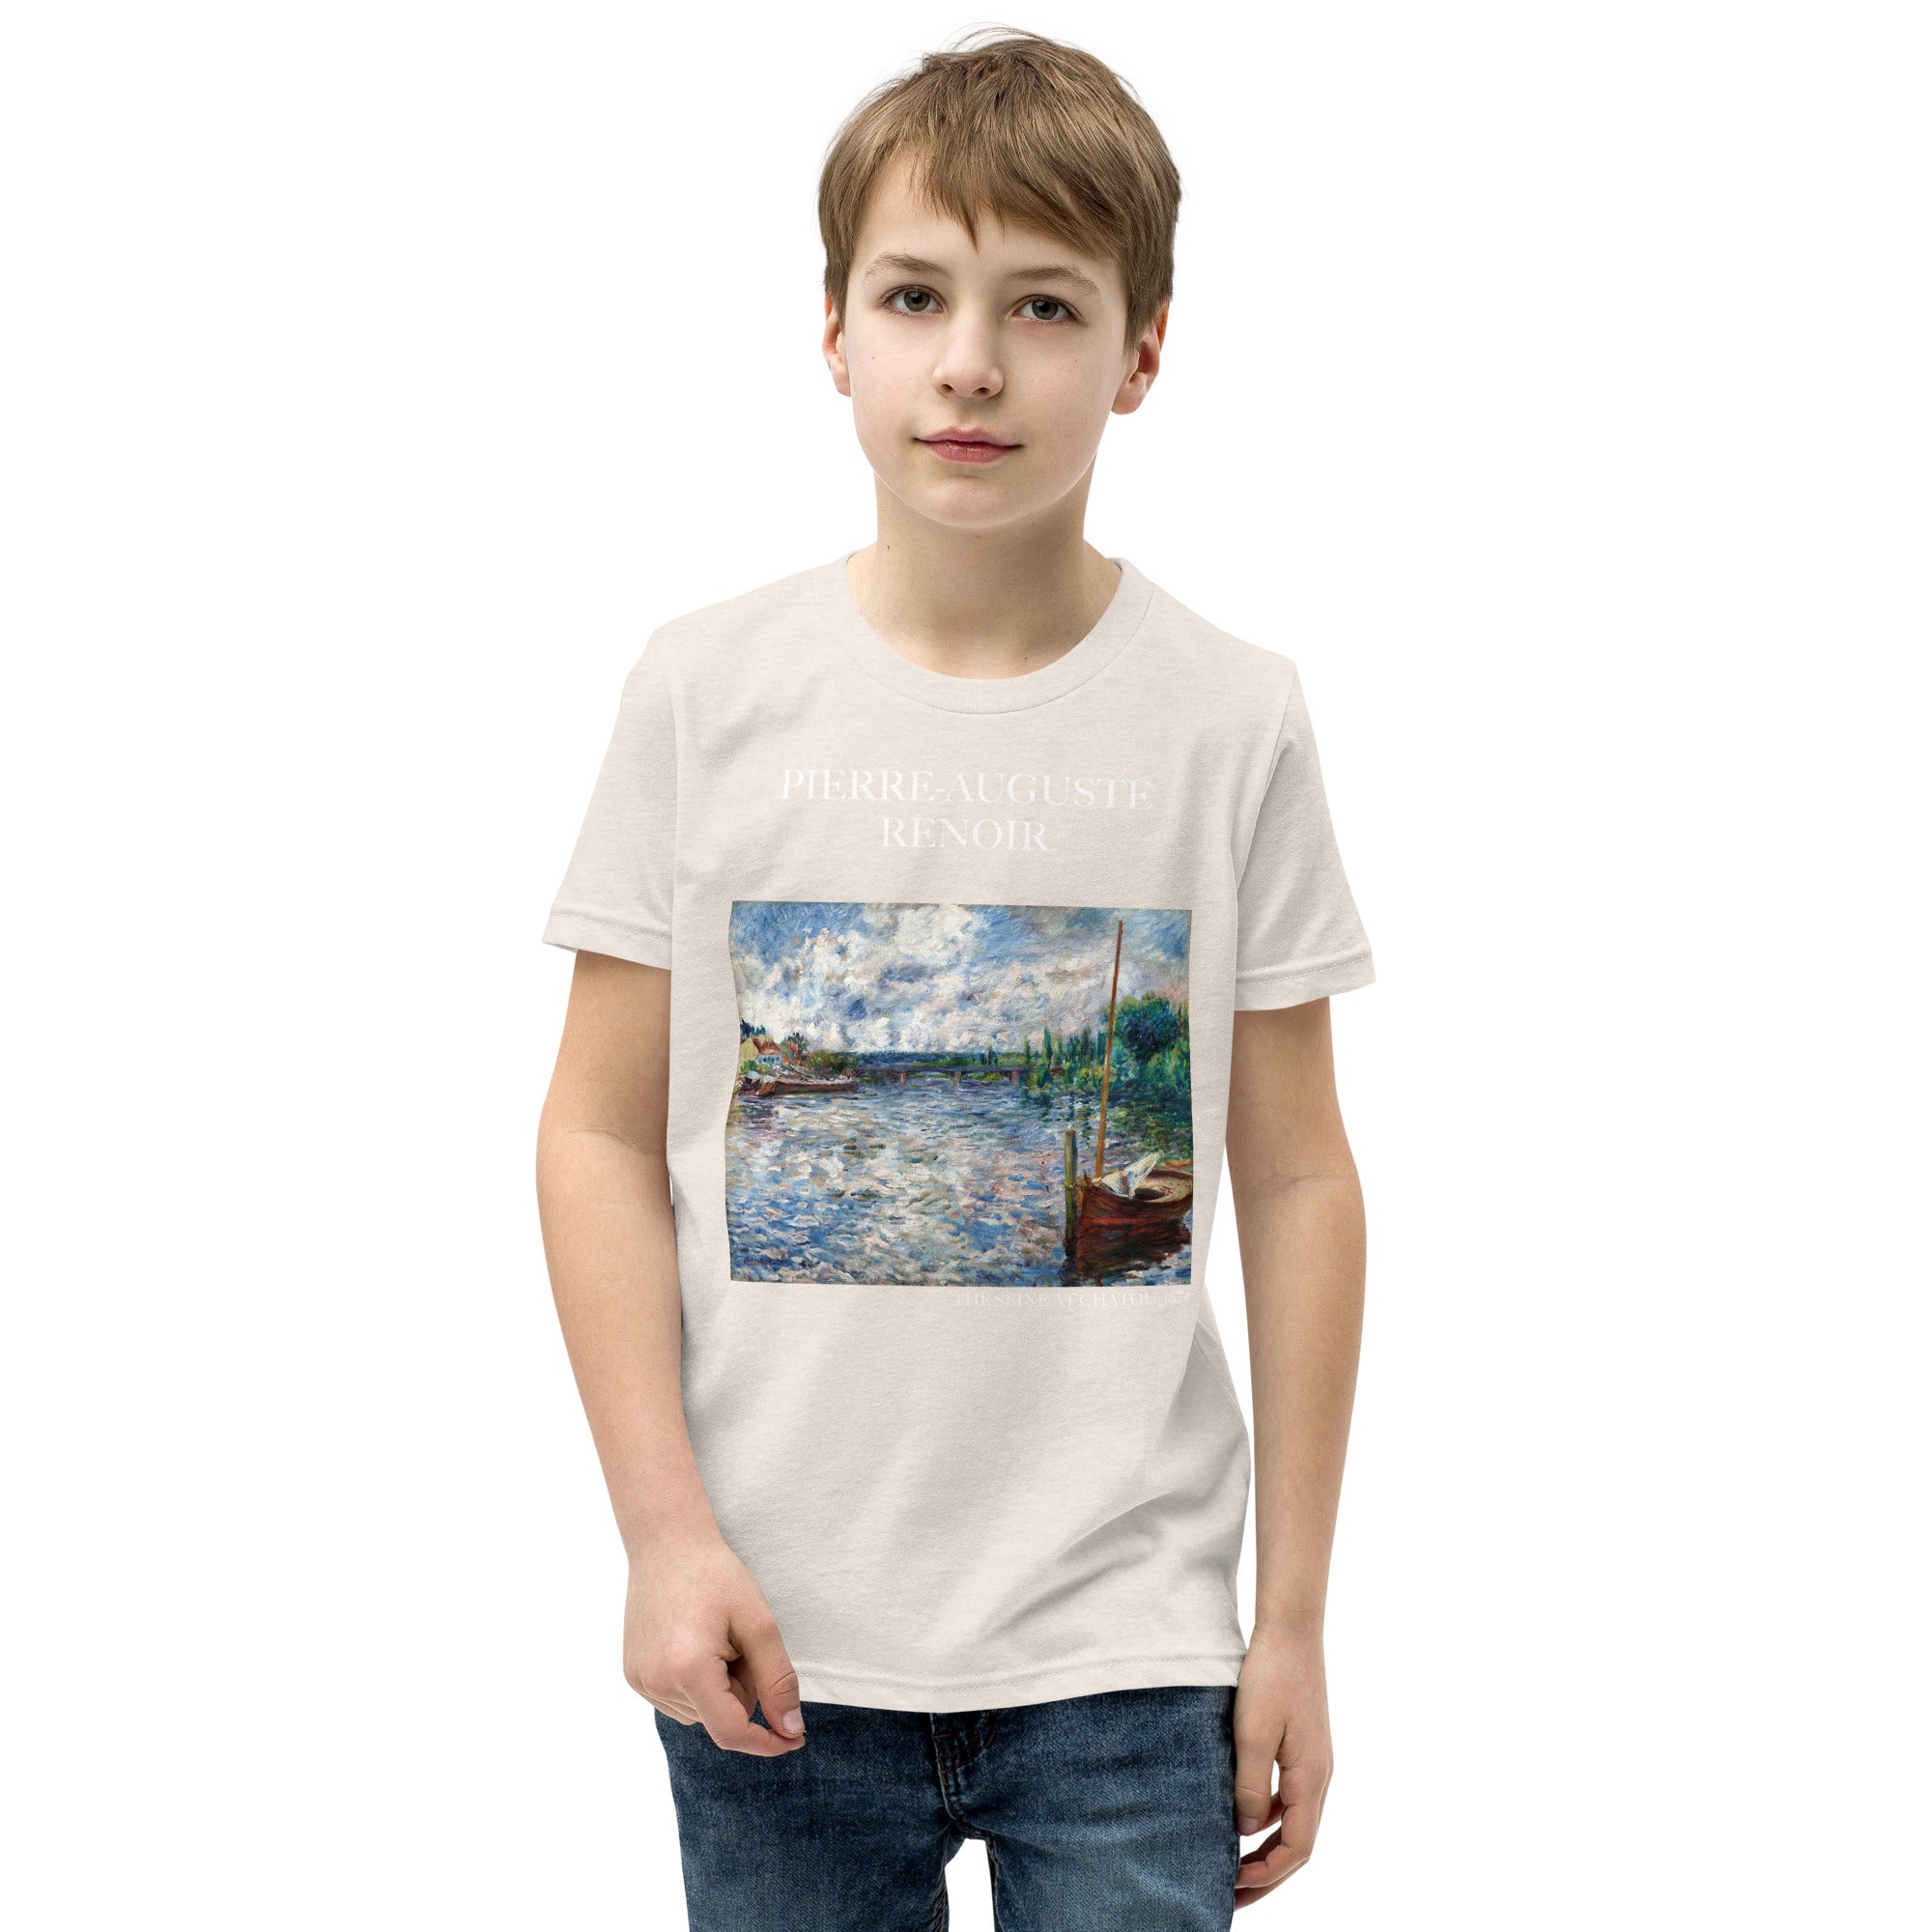 Pierre-Auguste Renoir 'The Seine at Chatou' Famous Painting Short Sleeve T-Shirt | Premium Youth Art Tee